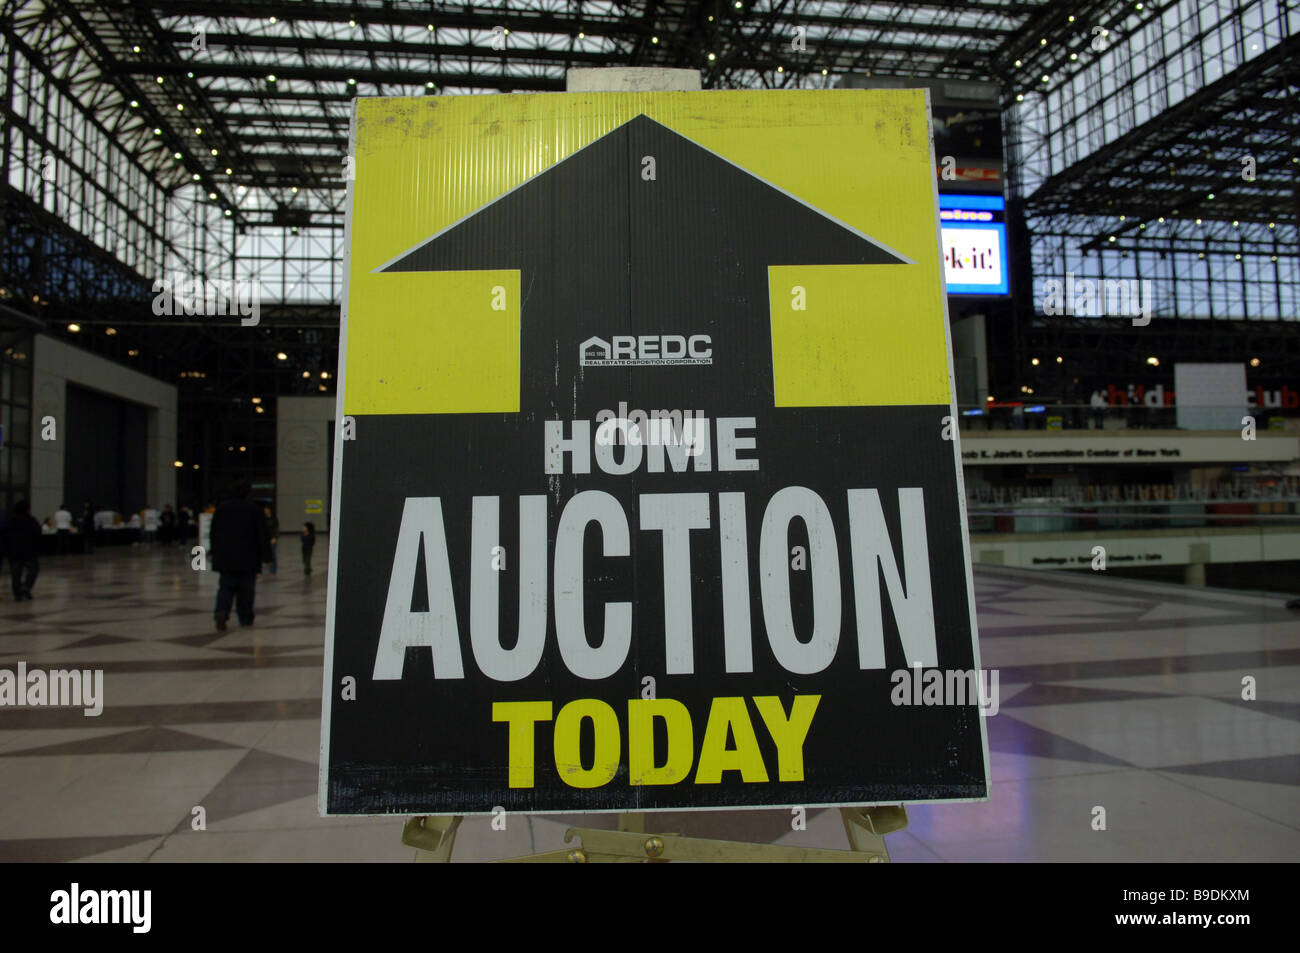 Real estate bargain hunters descend on the Jacob Javits Convention Center in New York Stock Photo